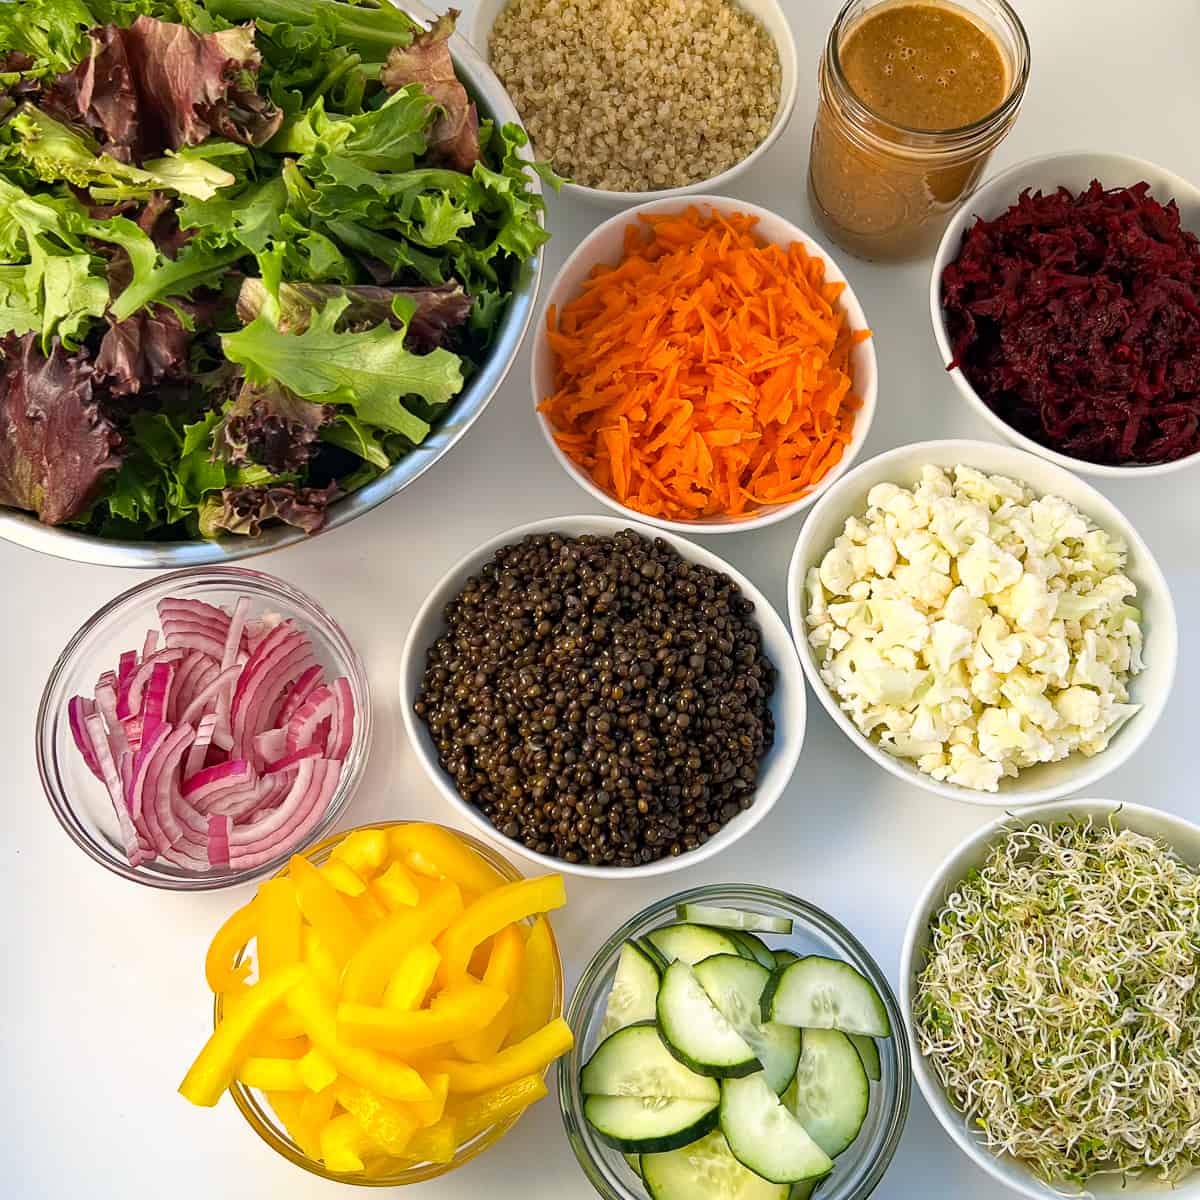 top view of superfood salad ingredients: lettuce greens, quinoa, walnut dressing carrots, beets, cauliflower, lentils, onion, bell pepper, cucumbers, sprouts